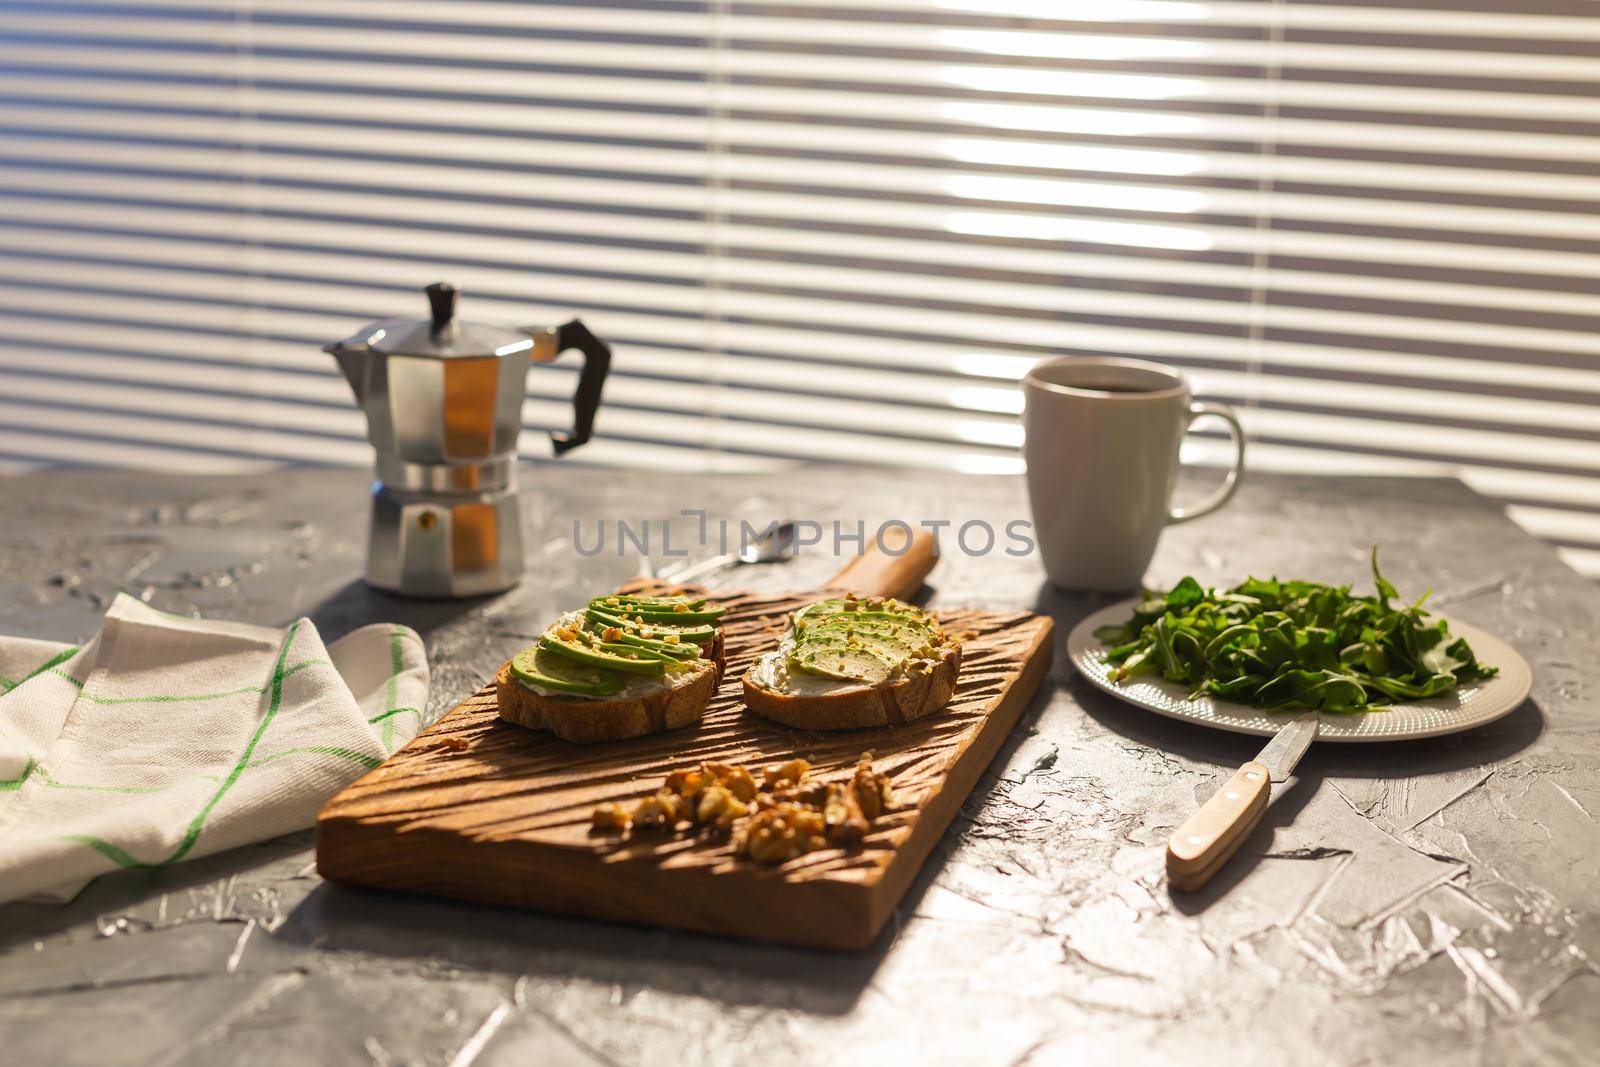 Sliced avocado on toast bread with nuts and coffee. Spinach on a plate and moka pot. Breakfast and healthy food